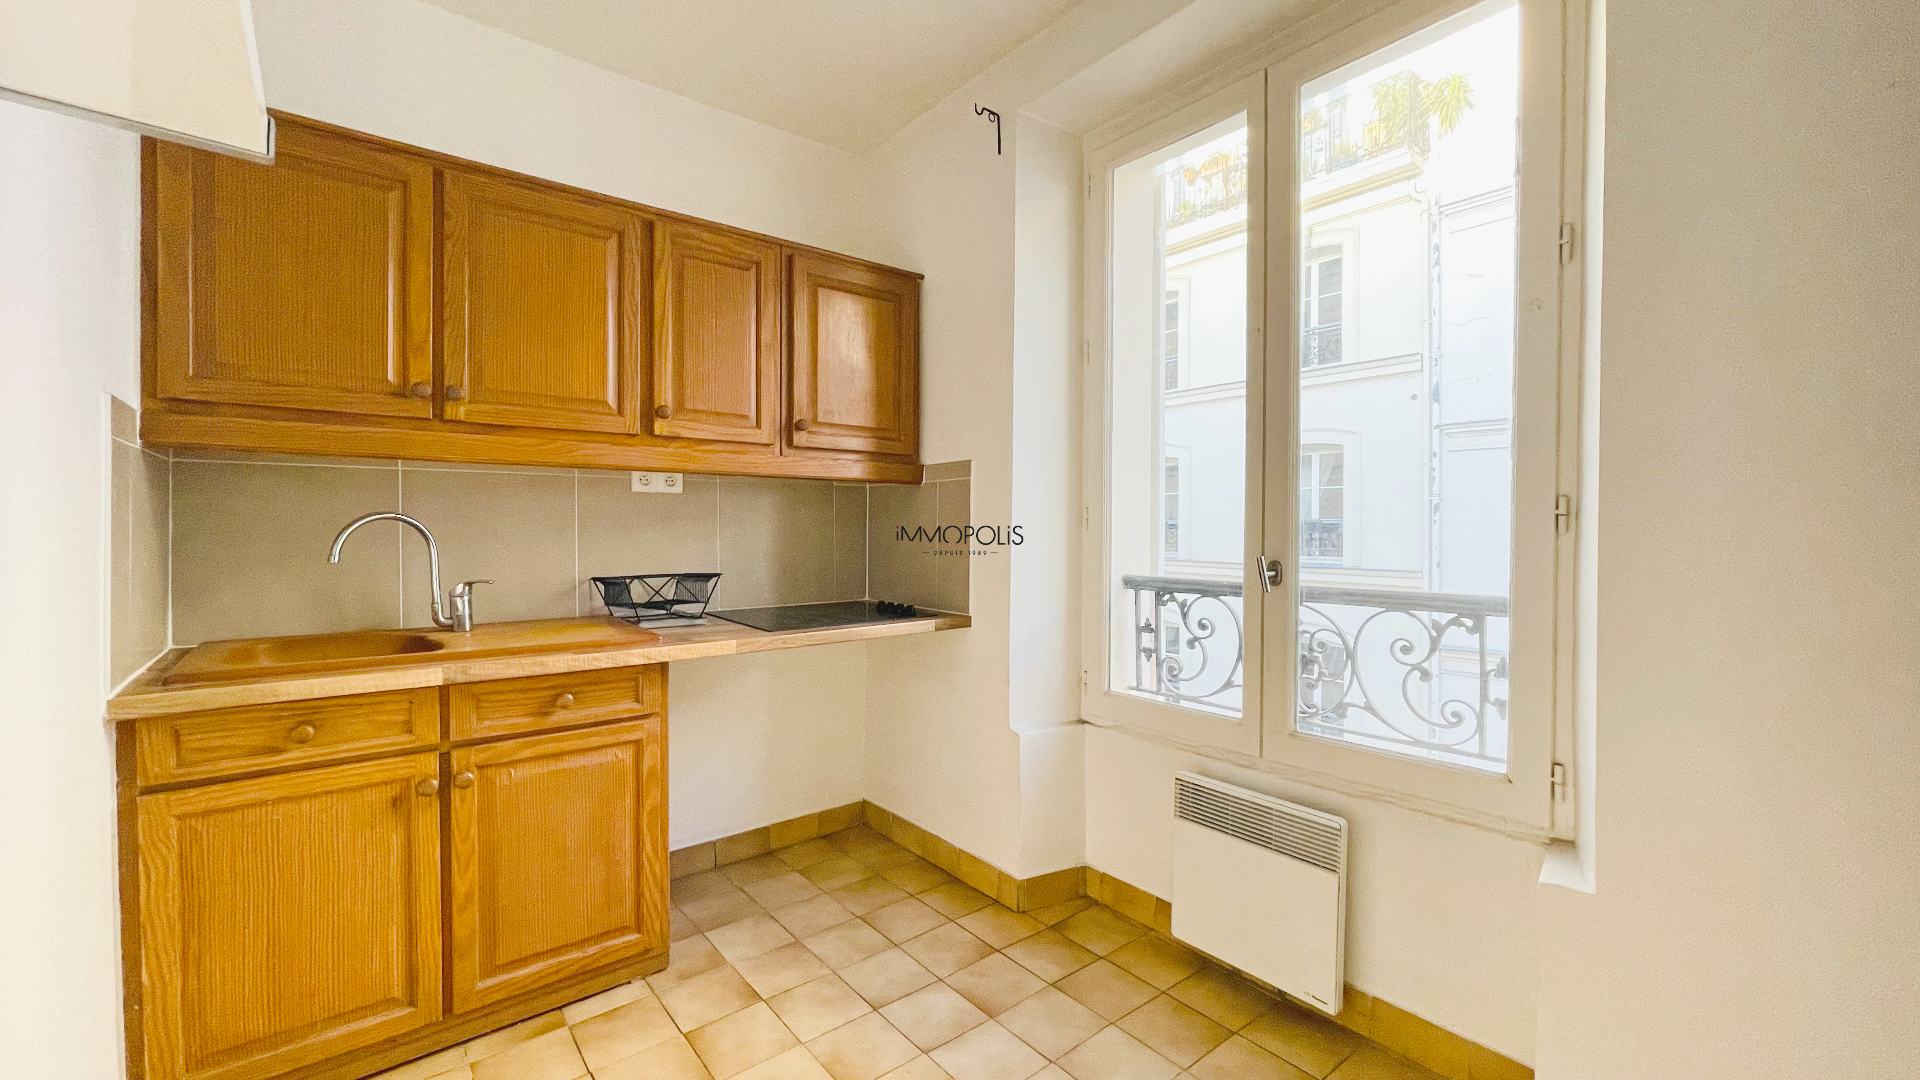 Beautiful studio in Montmartre, 30 m² without loss of space located in a swallowed building 4